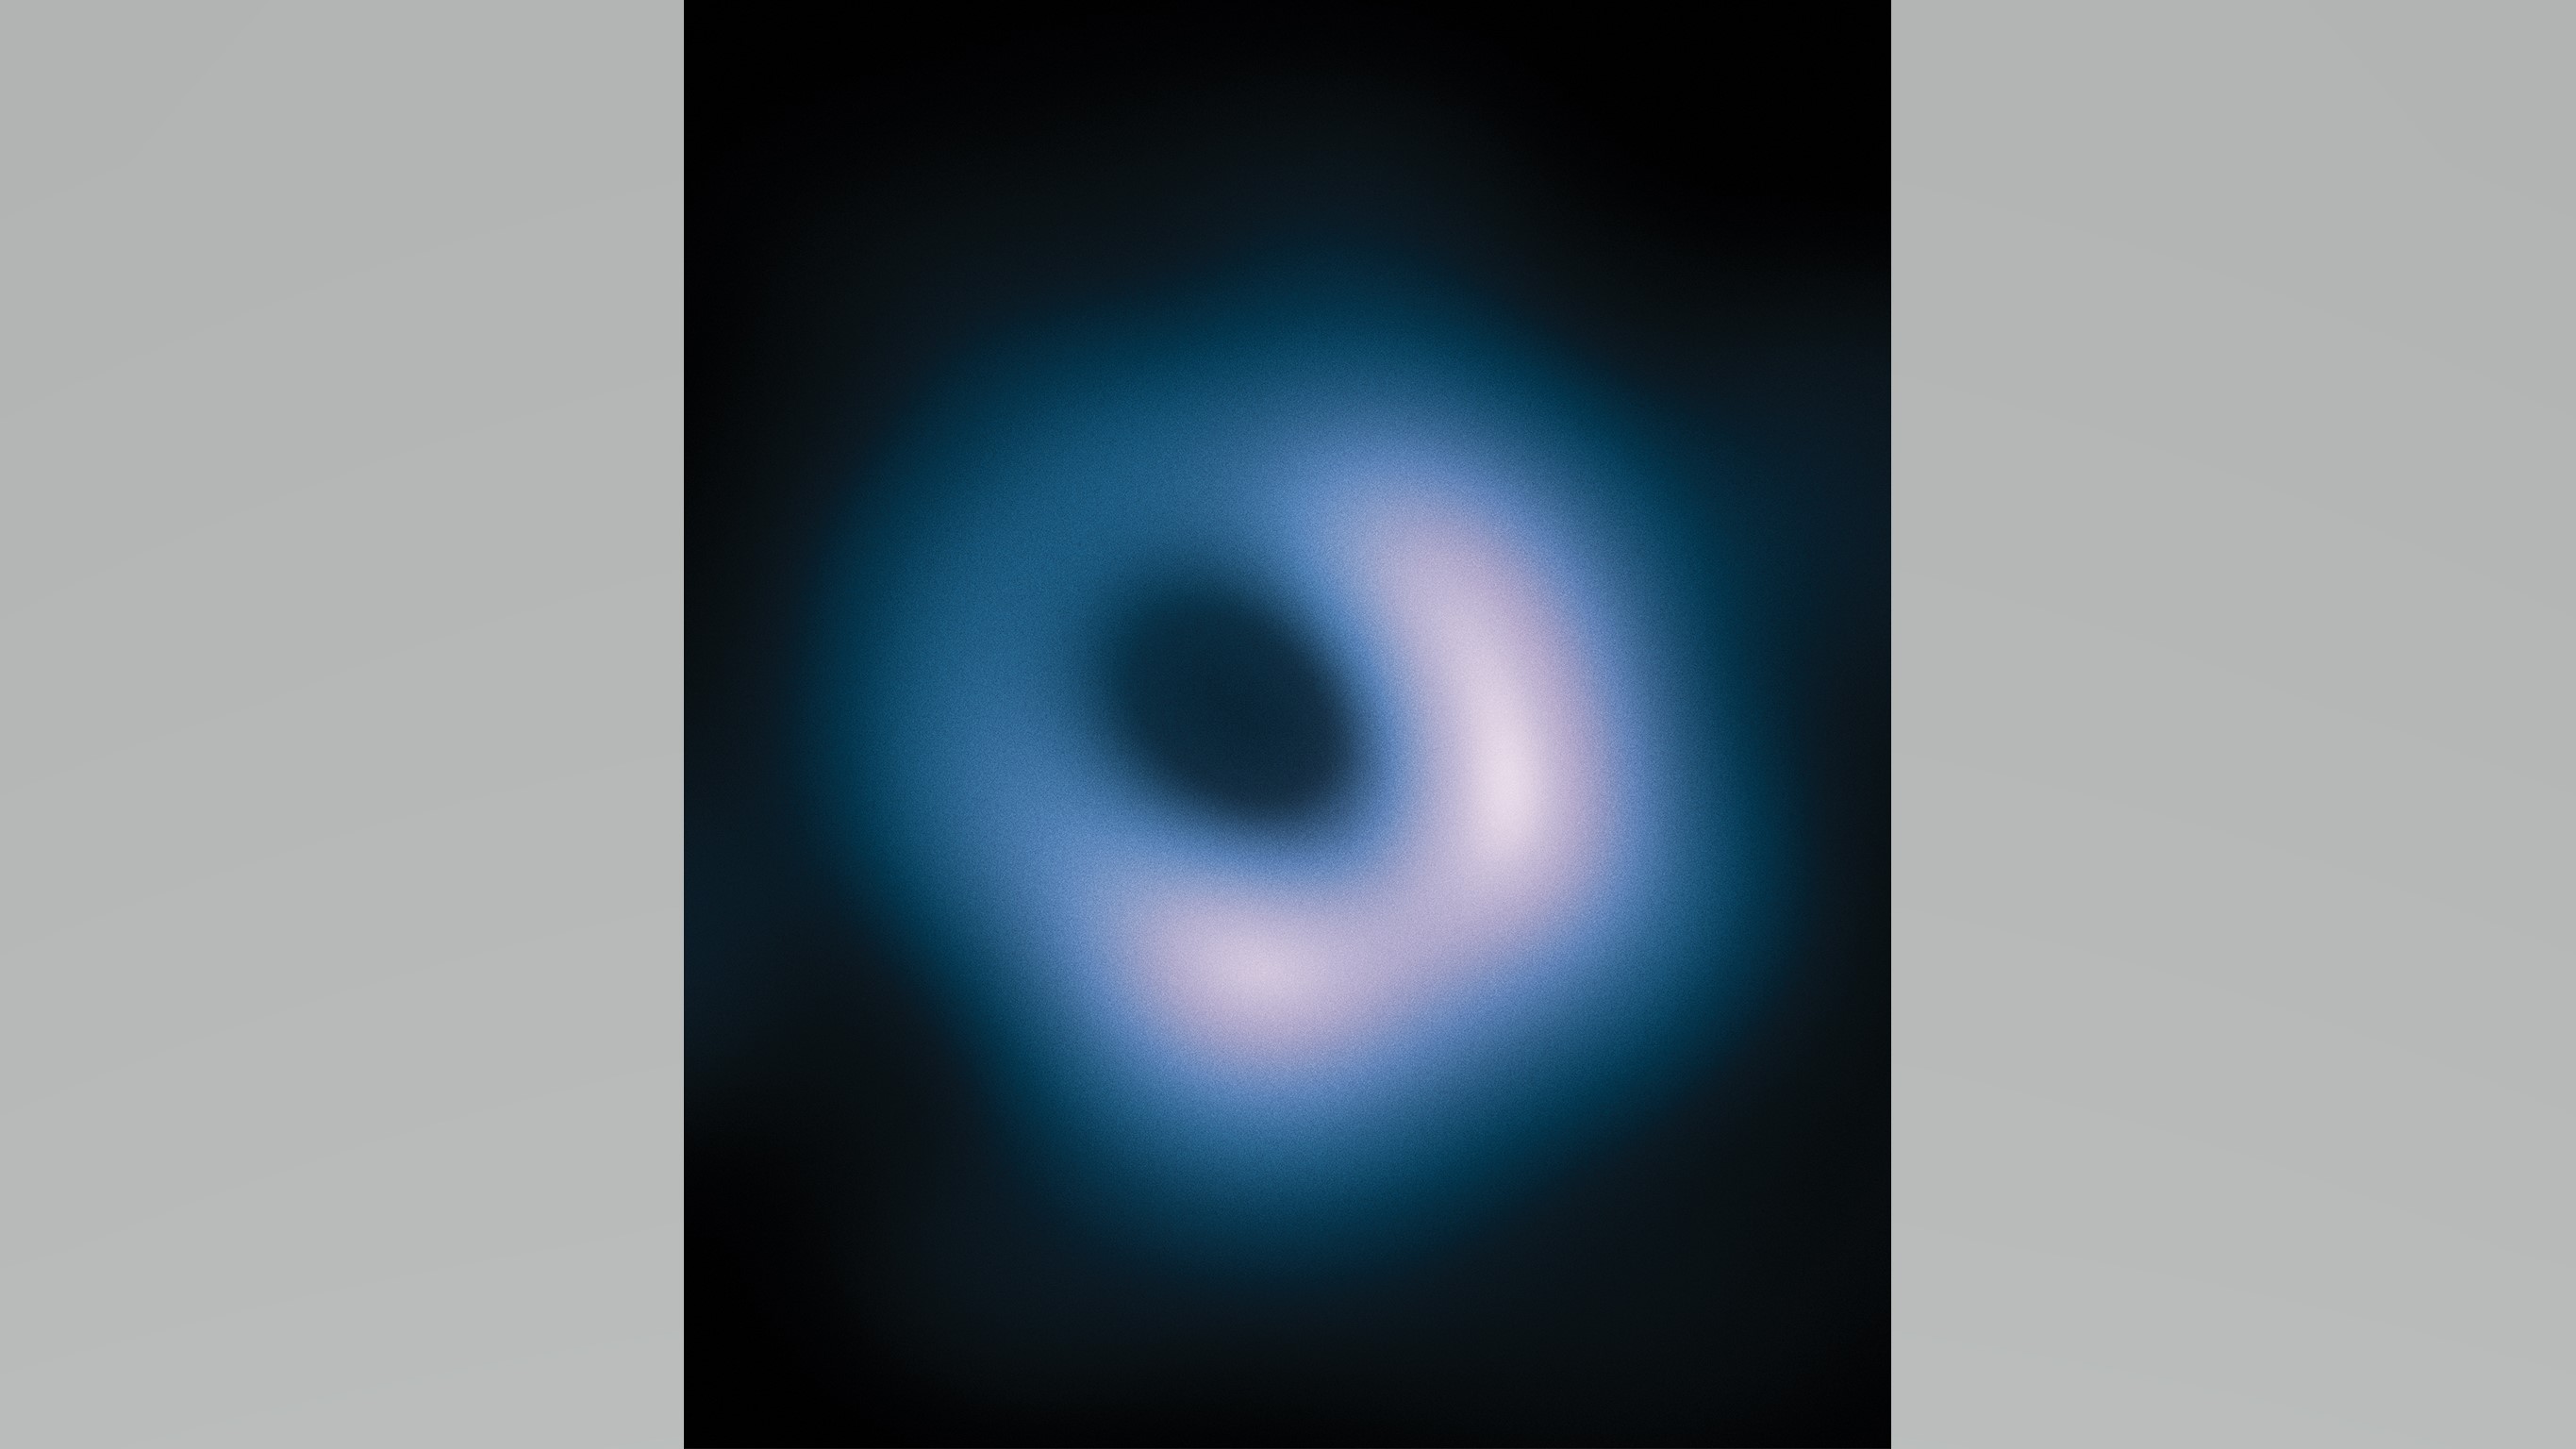 The cover of Arcade Fire's record "We," featuring the Event Horizon Telescope image of black hole M87*.